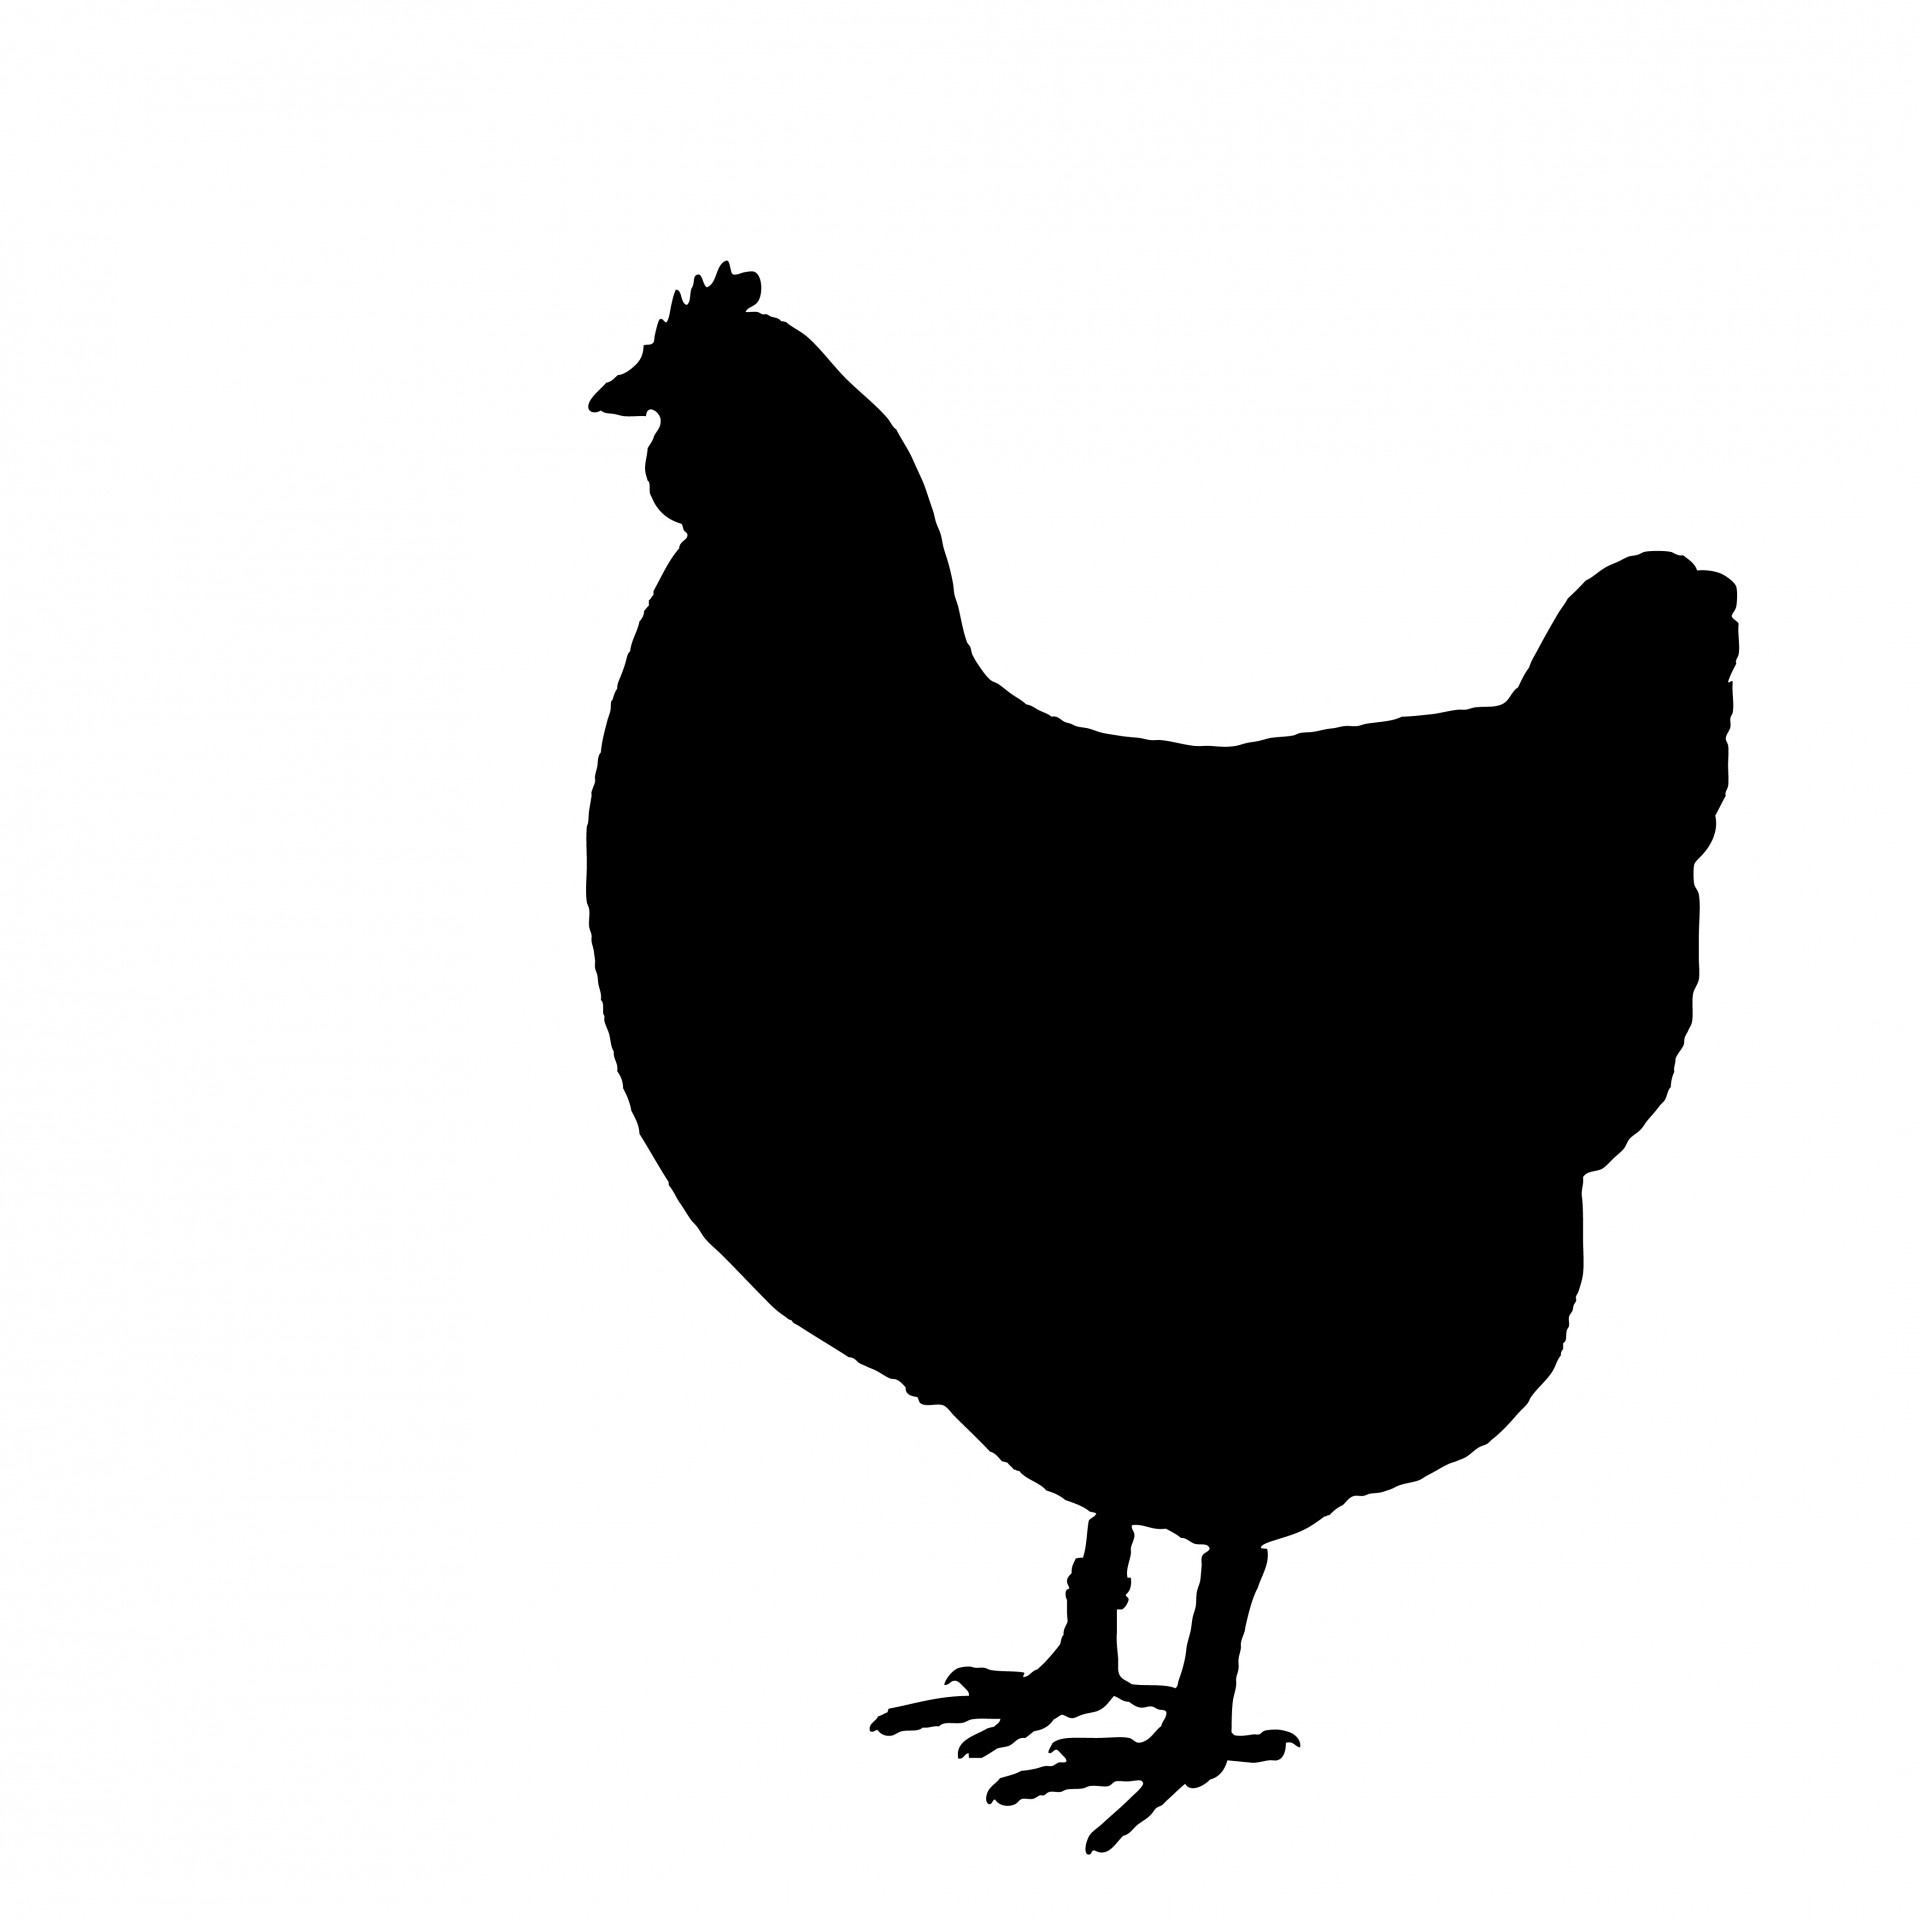 Chicken Silhouette Clipart Images - Public Domain Pictures - Page 1